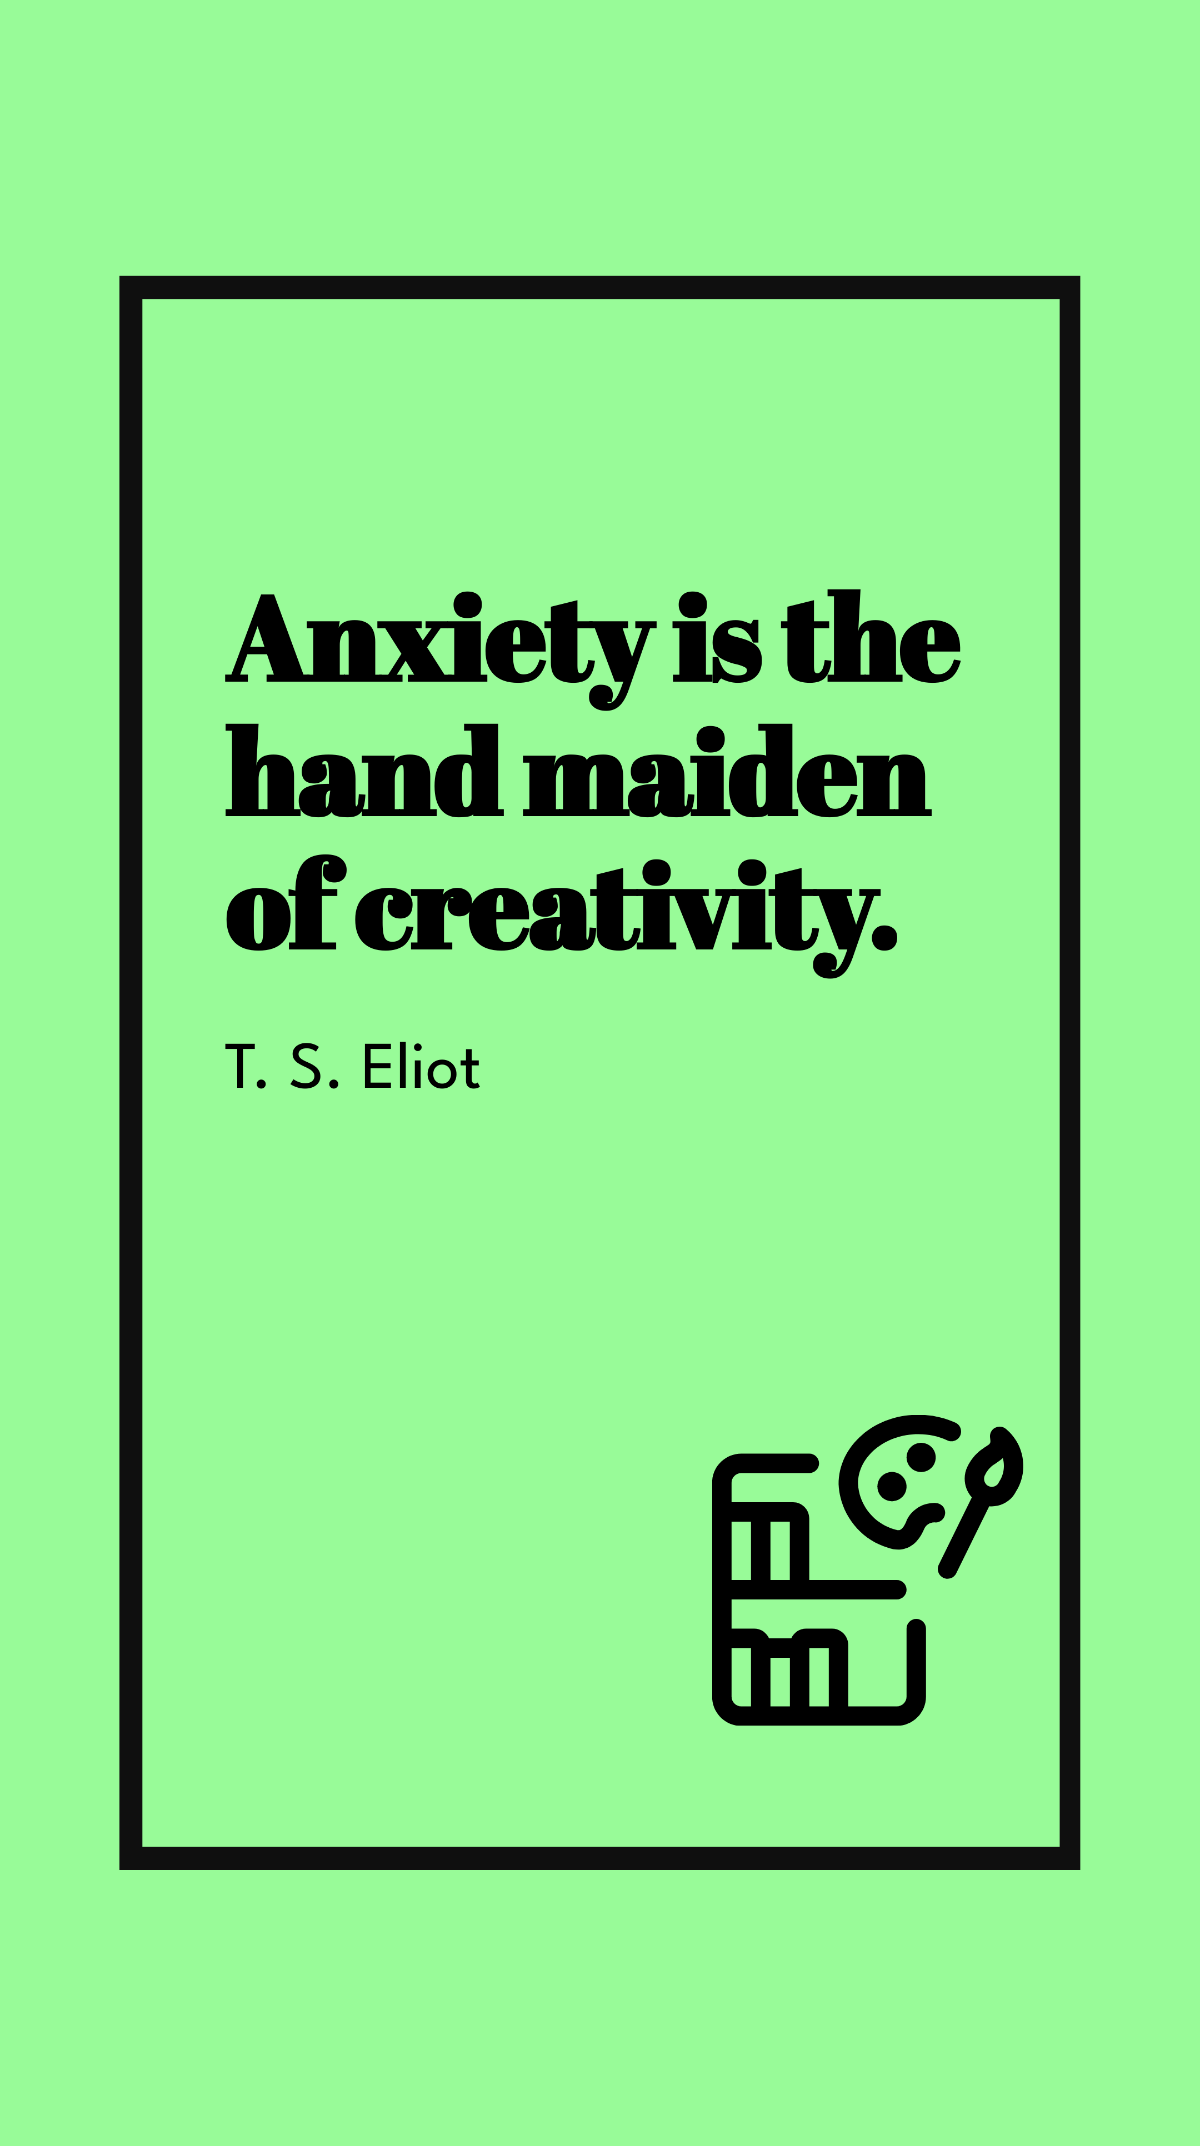 Free T. S. Eliot - Anxiety is the hand maiden of creativity. Template